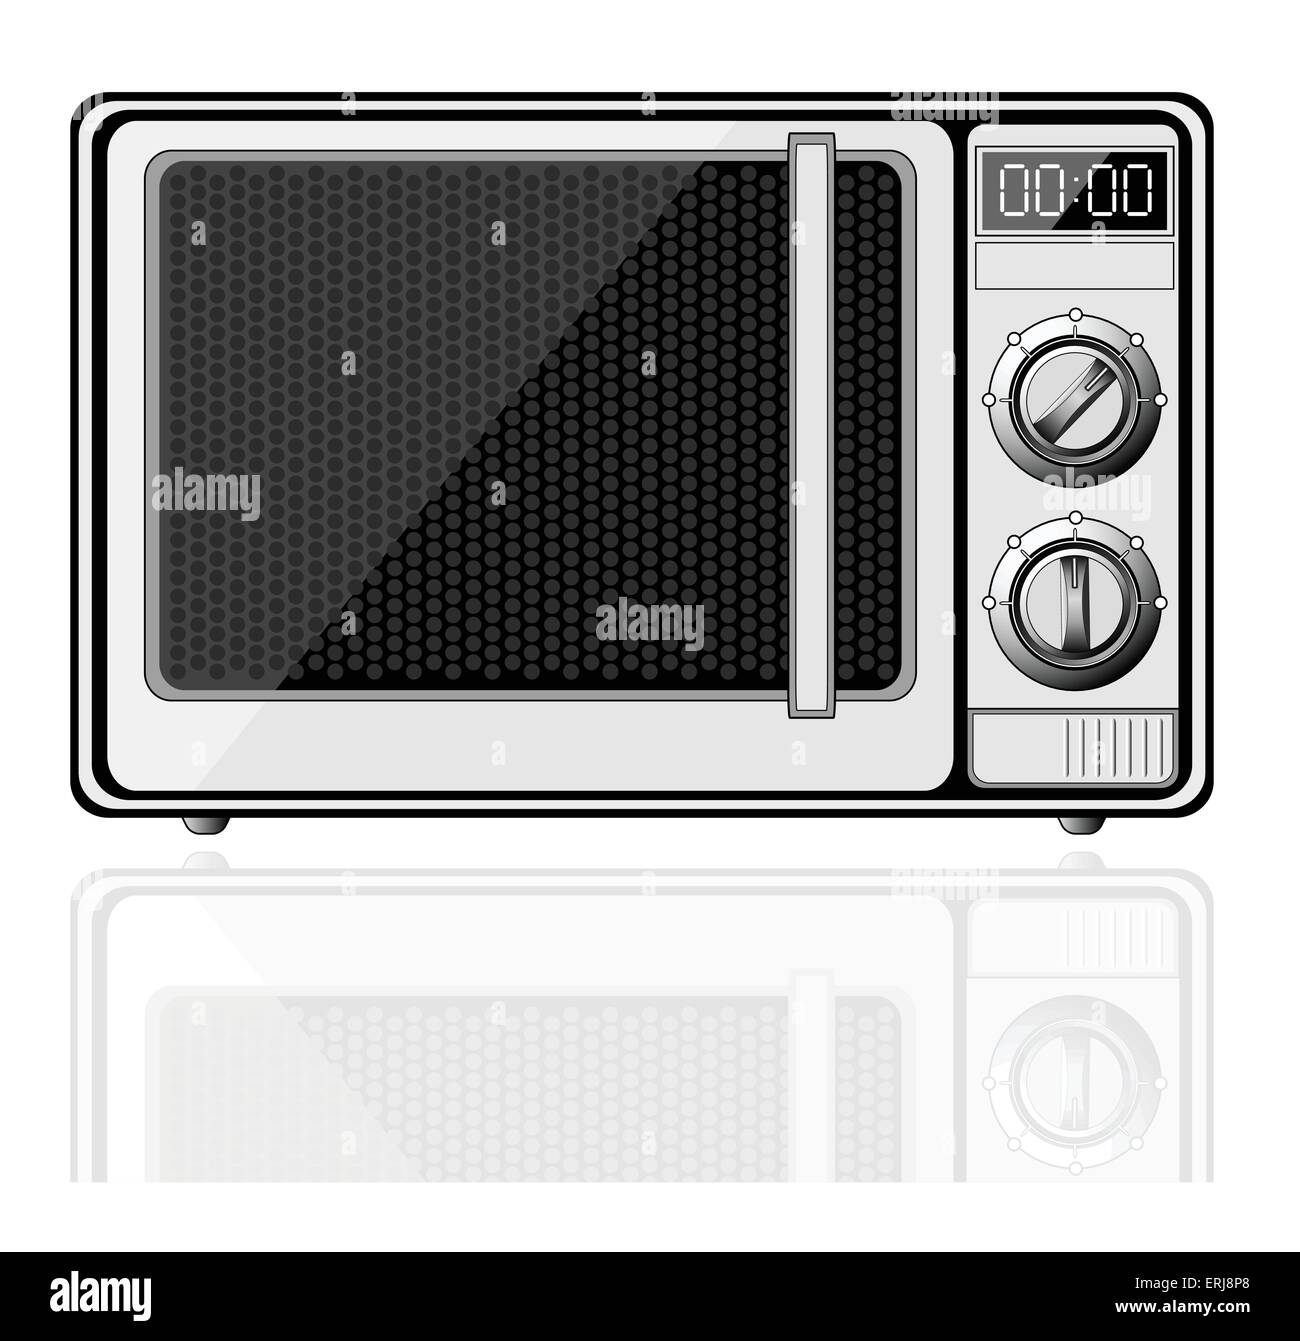 Microwave Stock Vector Images - Alamy